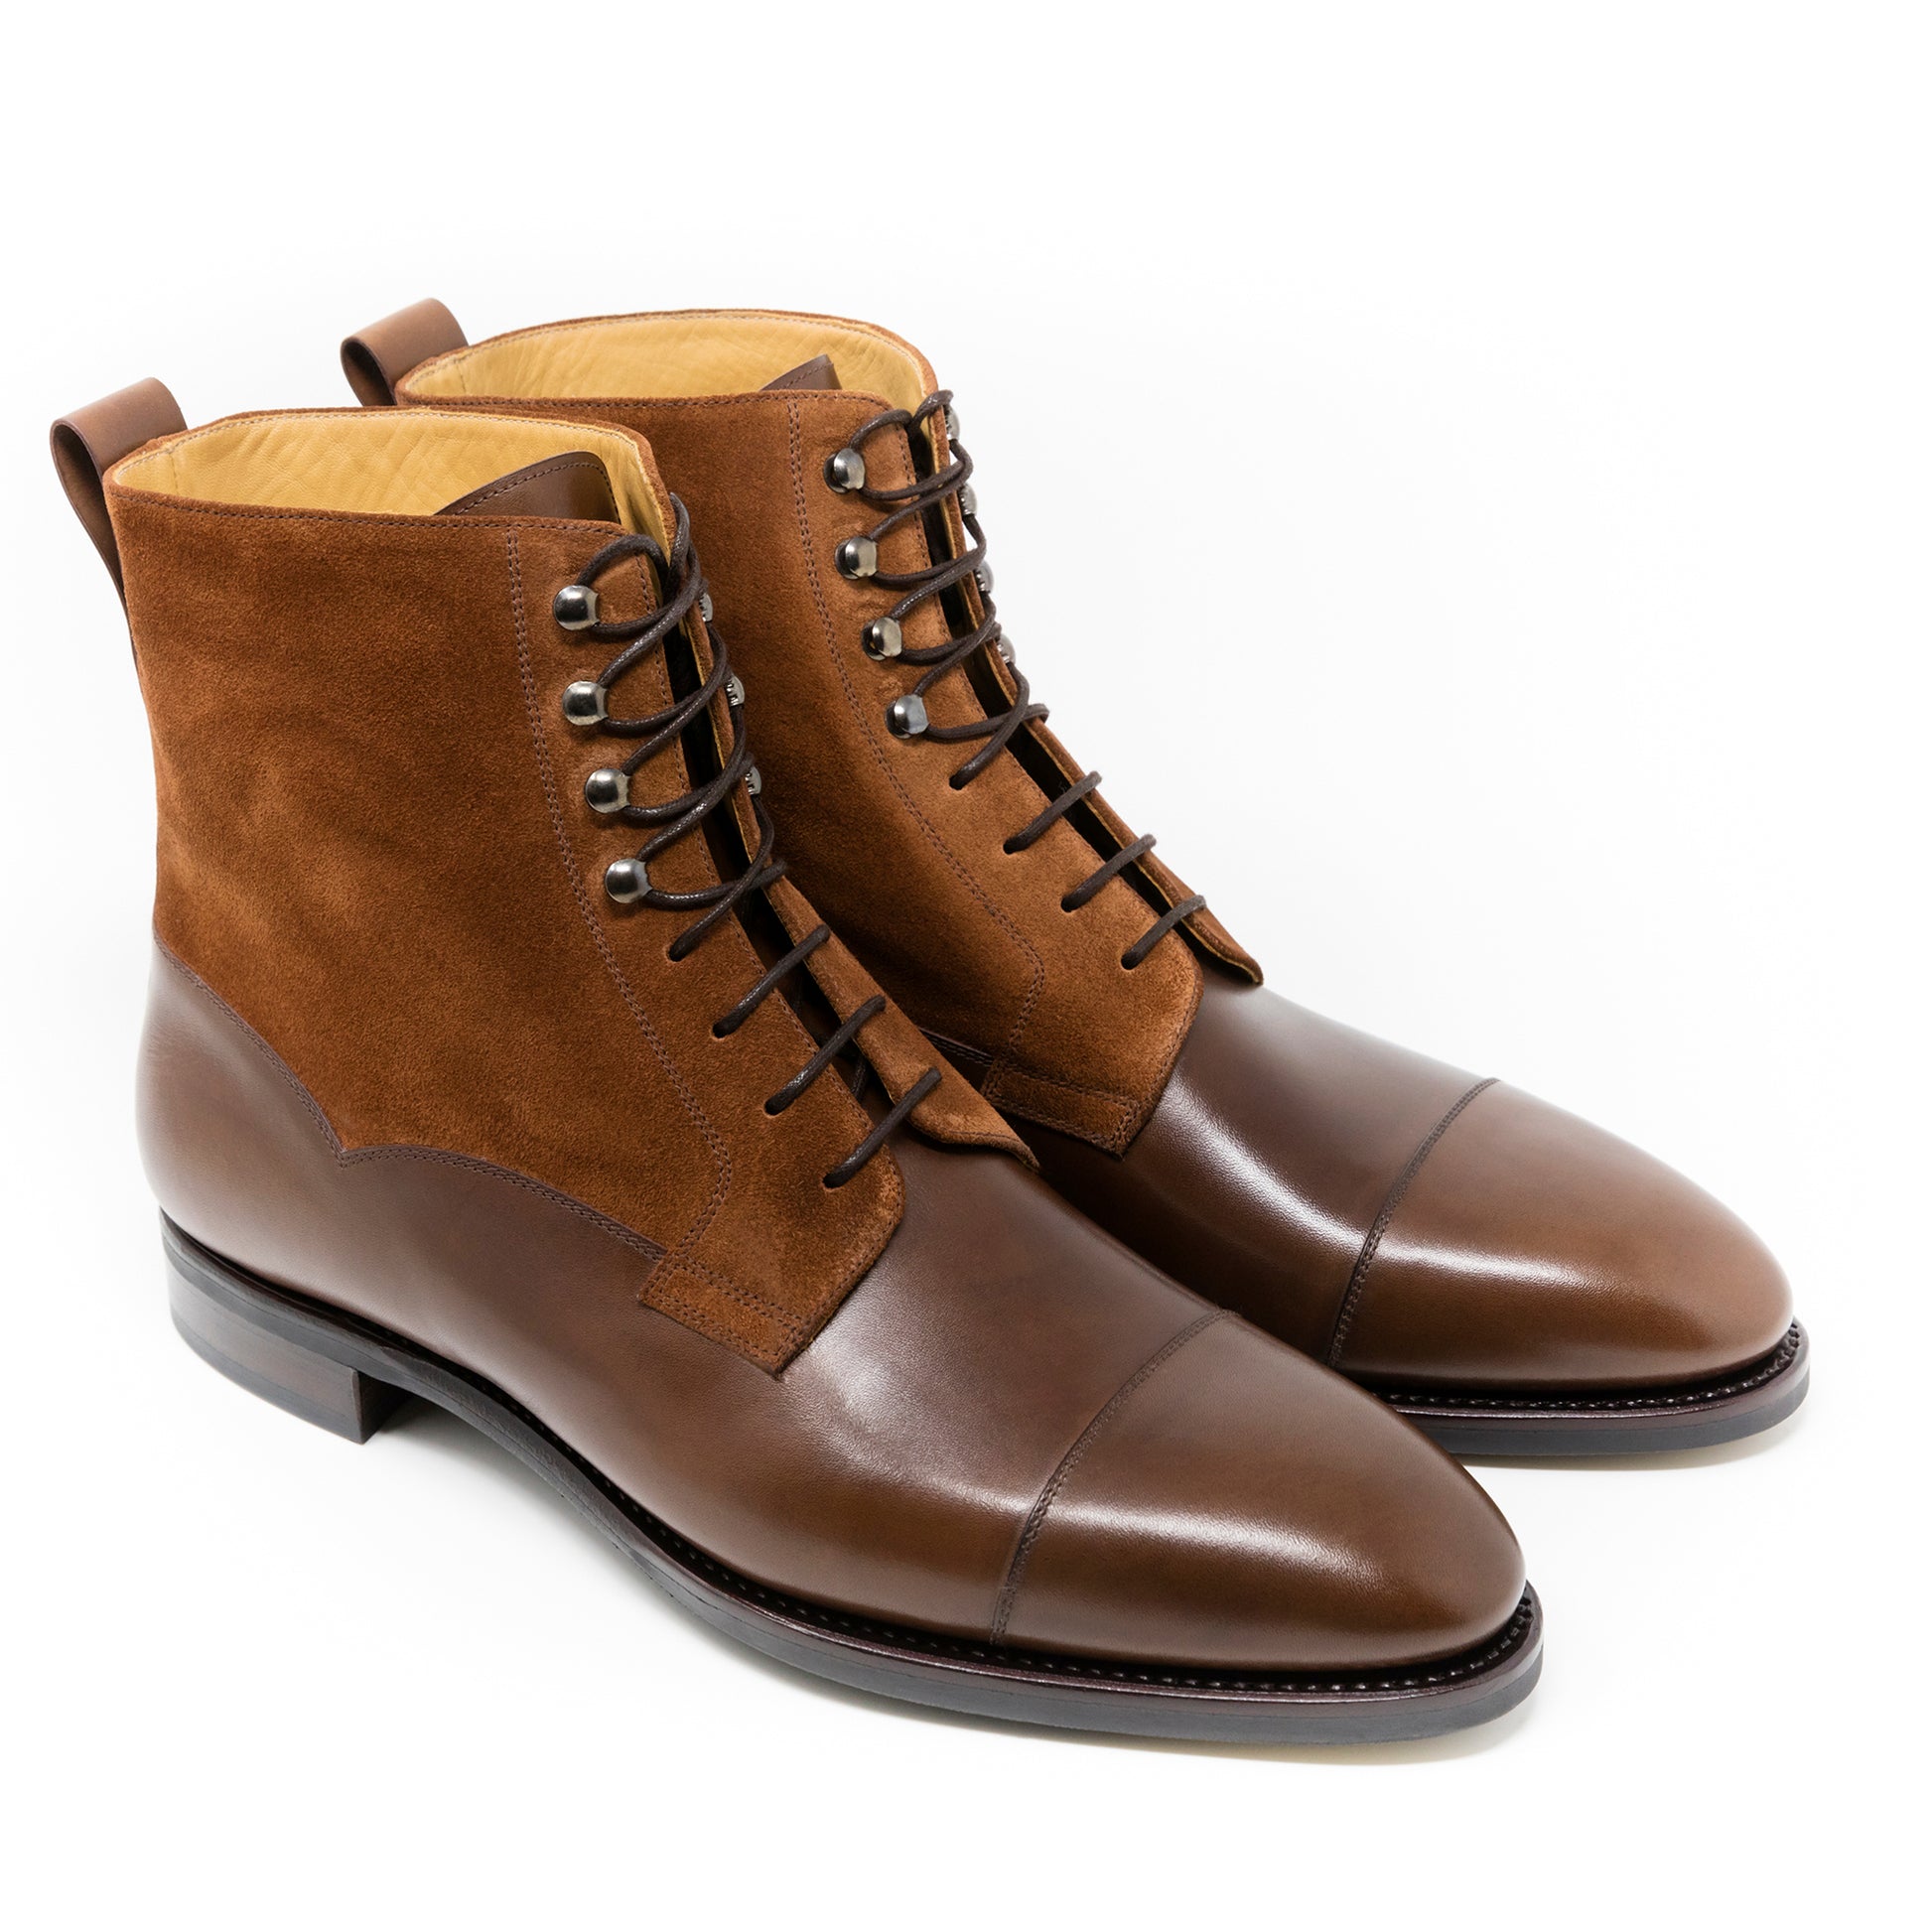 TLB Mallorca leather shoes 140 / GOYA / VEGANO BROWN & SUEDE POLO BROWN